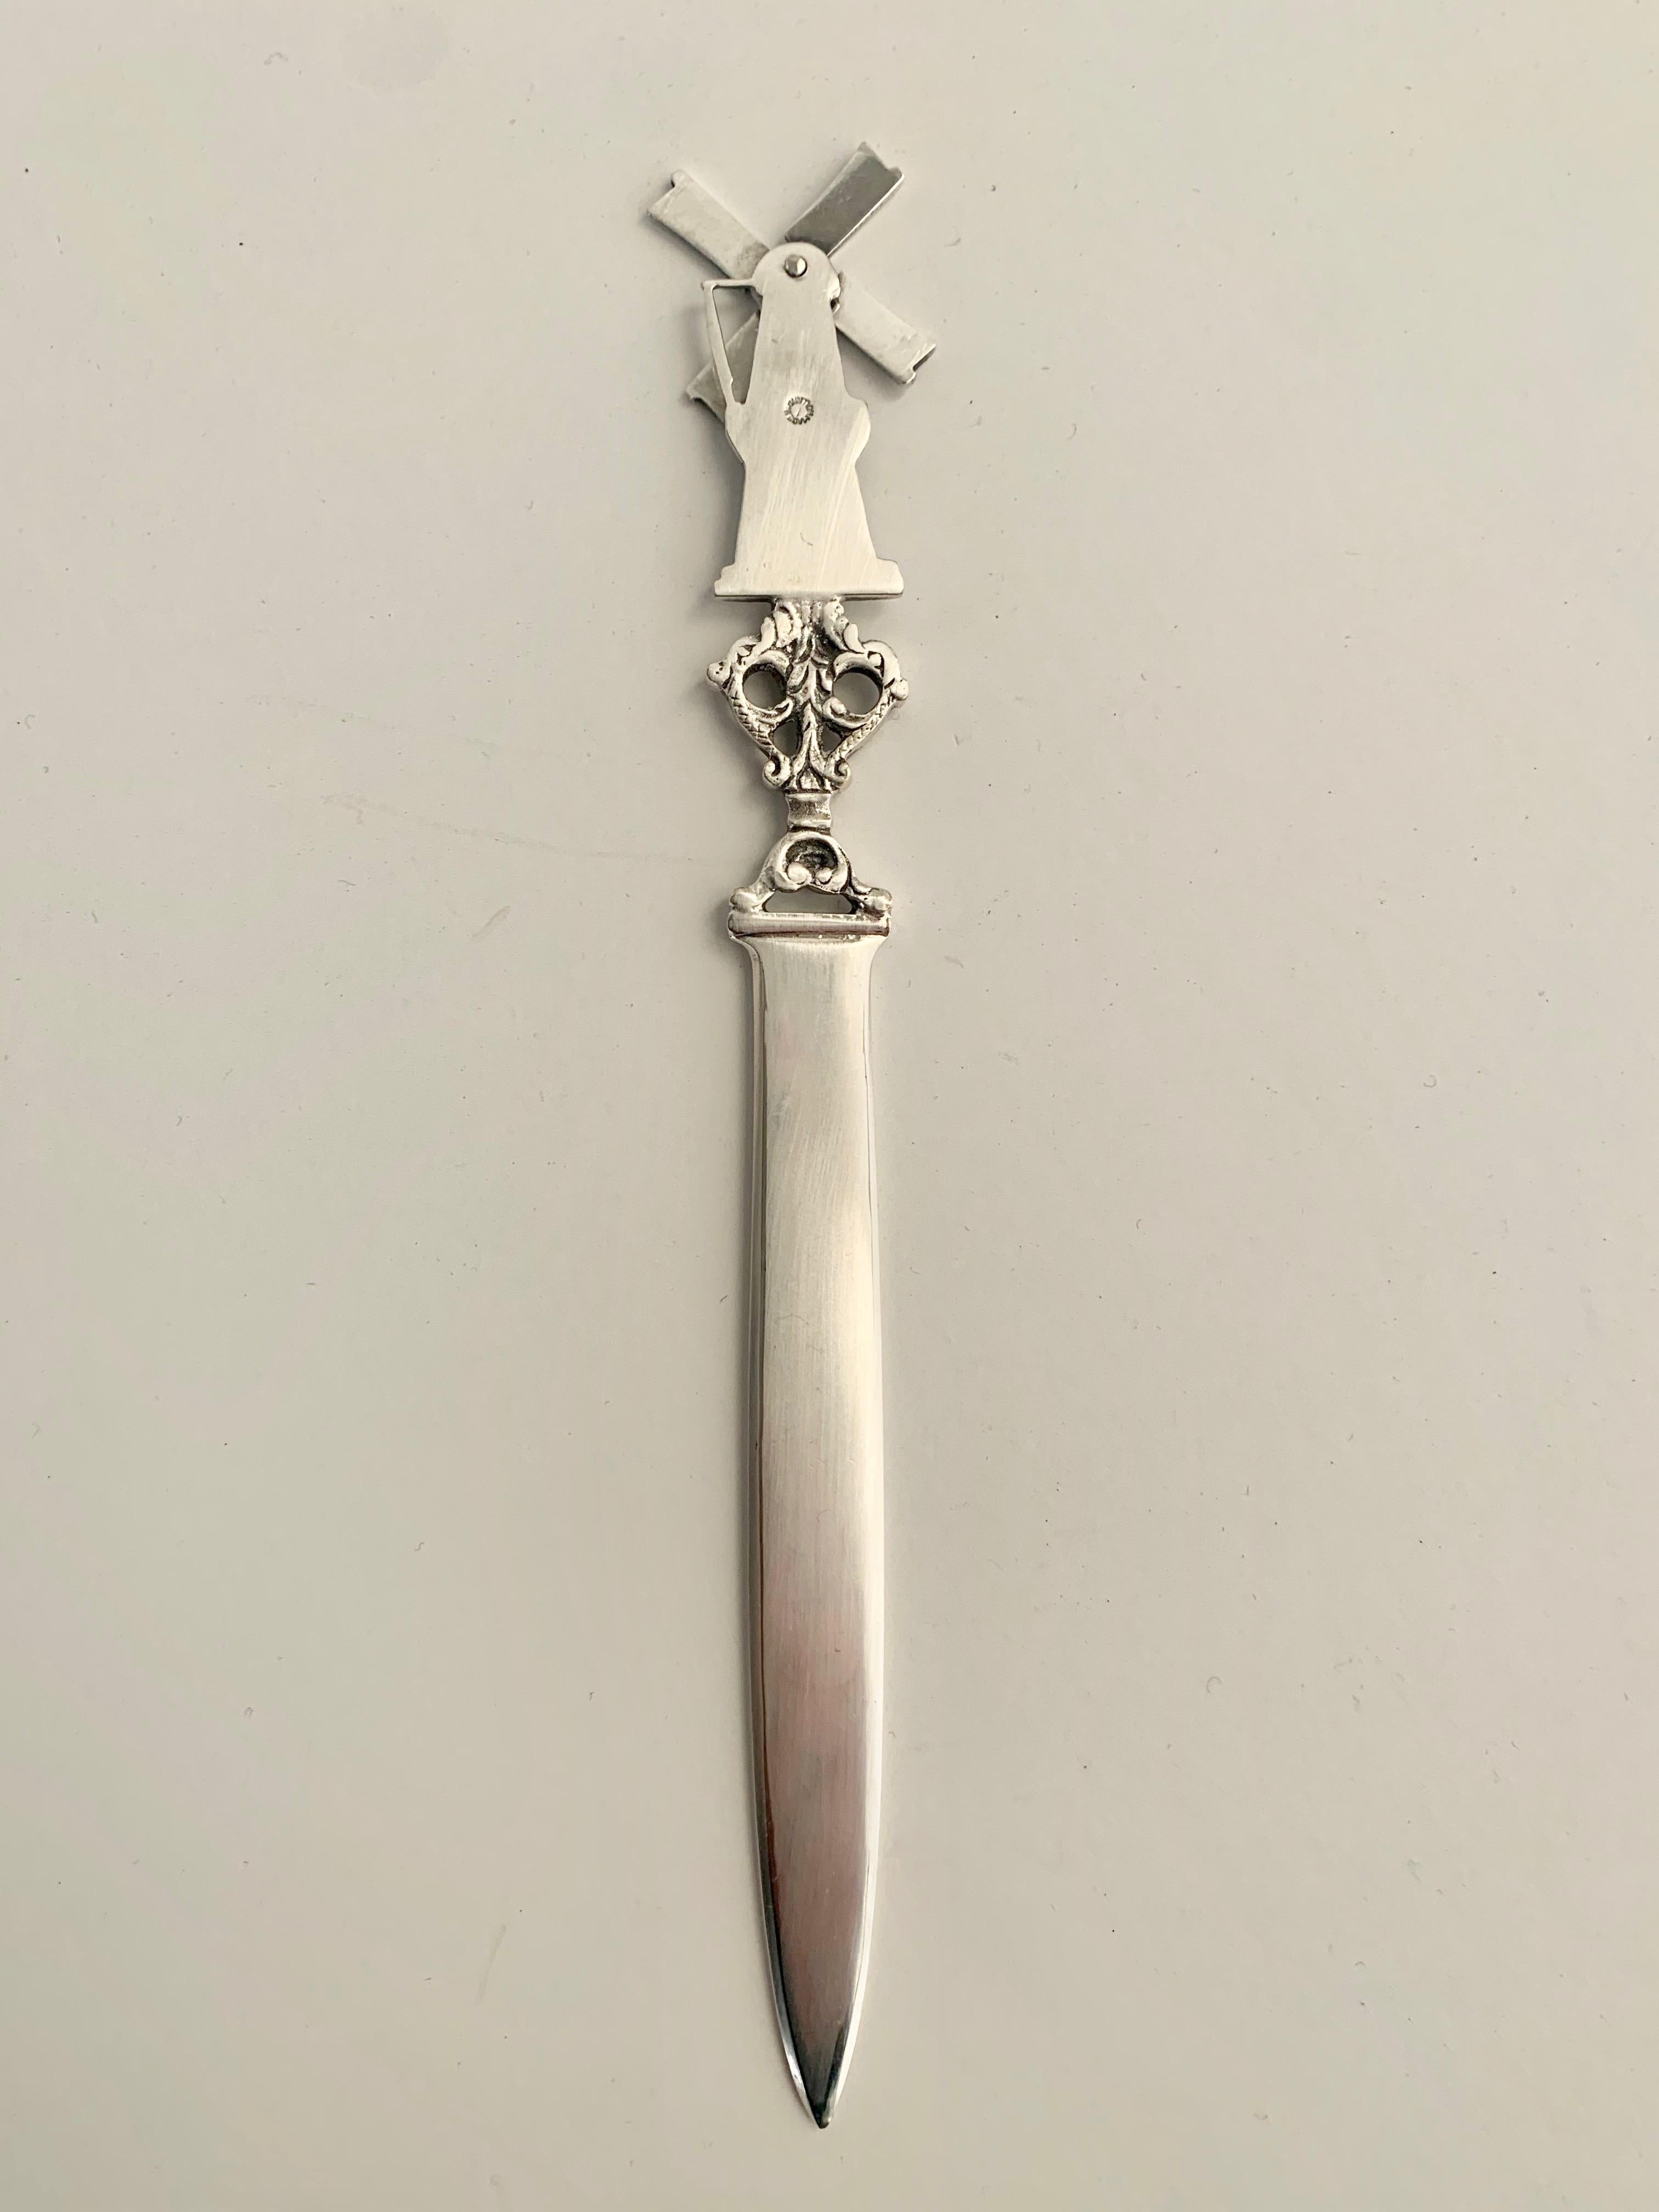 A wonderful Dutch silver letter opener with a windmill with blades that actually turn. Made in Holland. A wonderful addition to many desks.